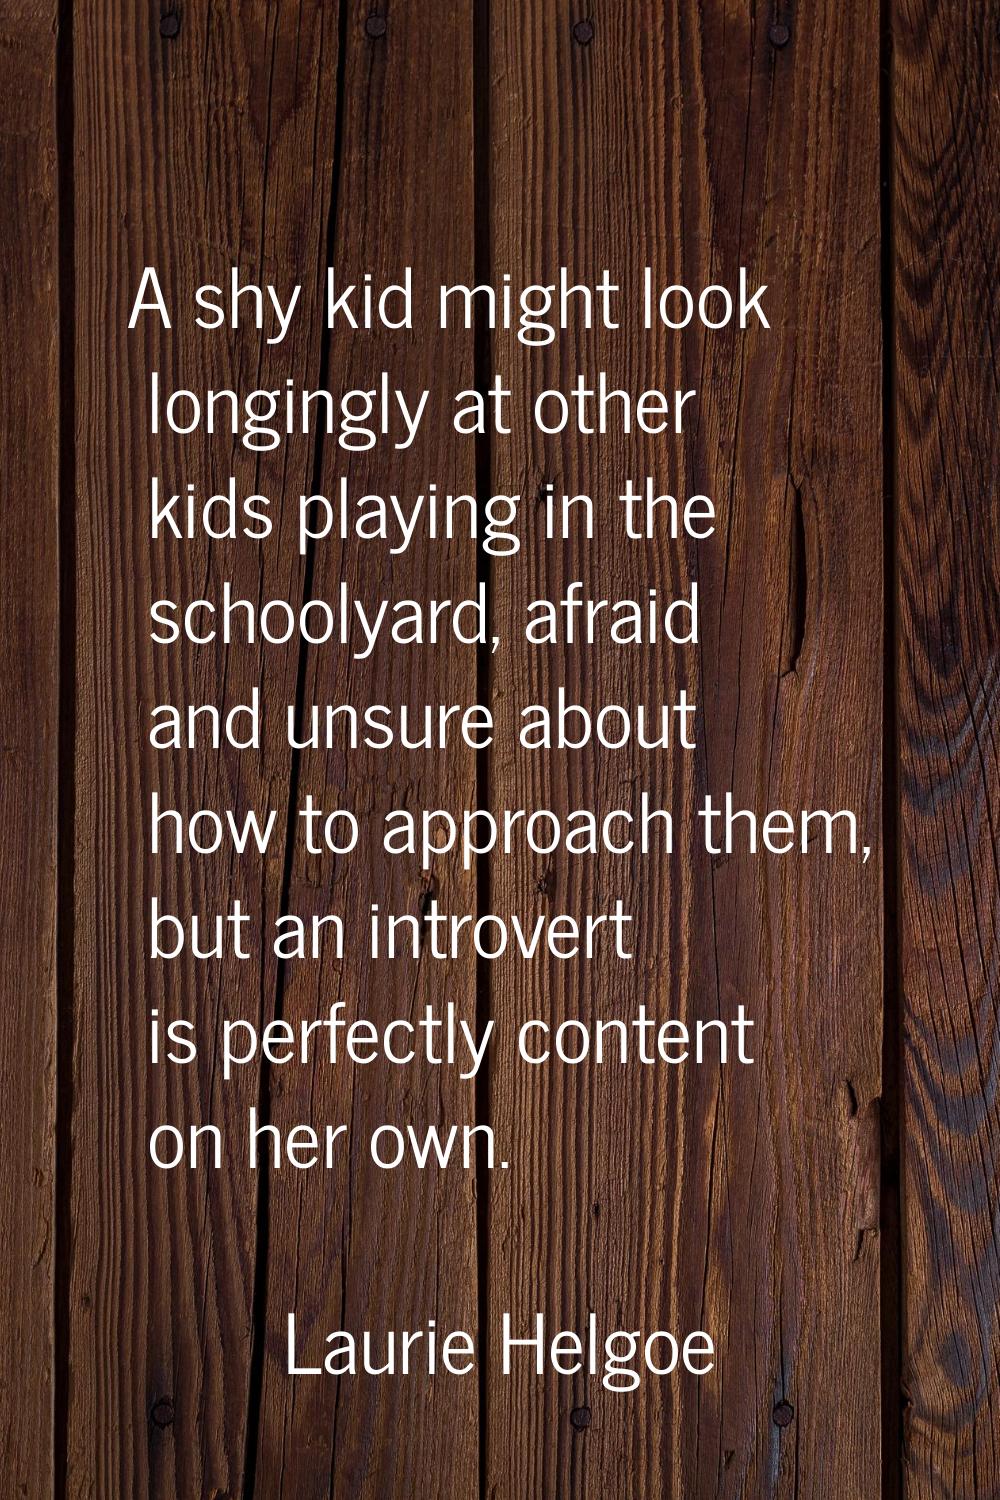 A shy kid might look longingly at other kids playing in the schoolyard, afraid and unsure about how